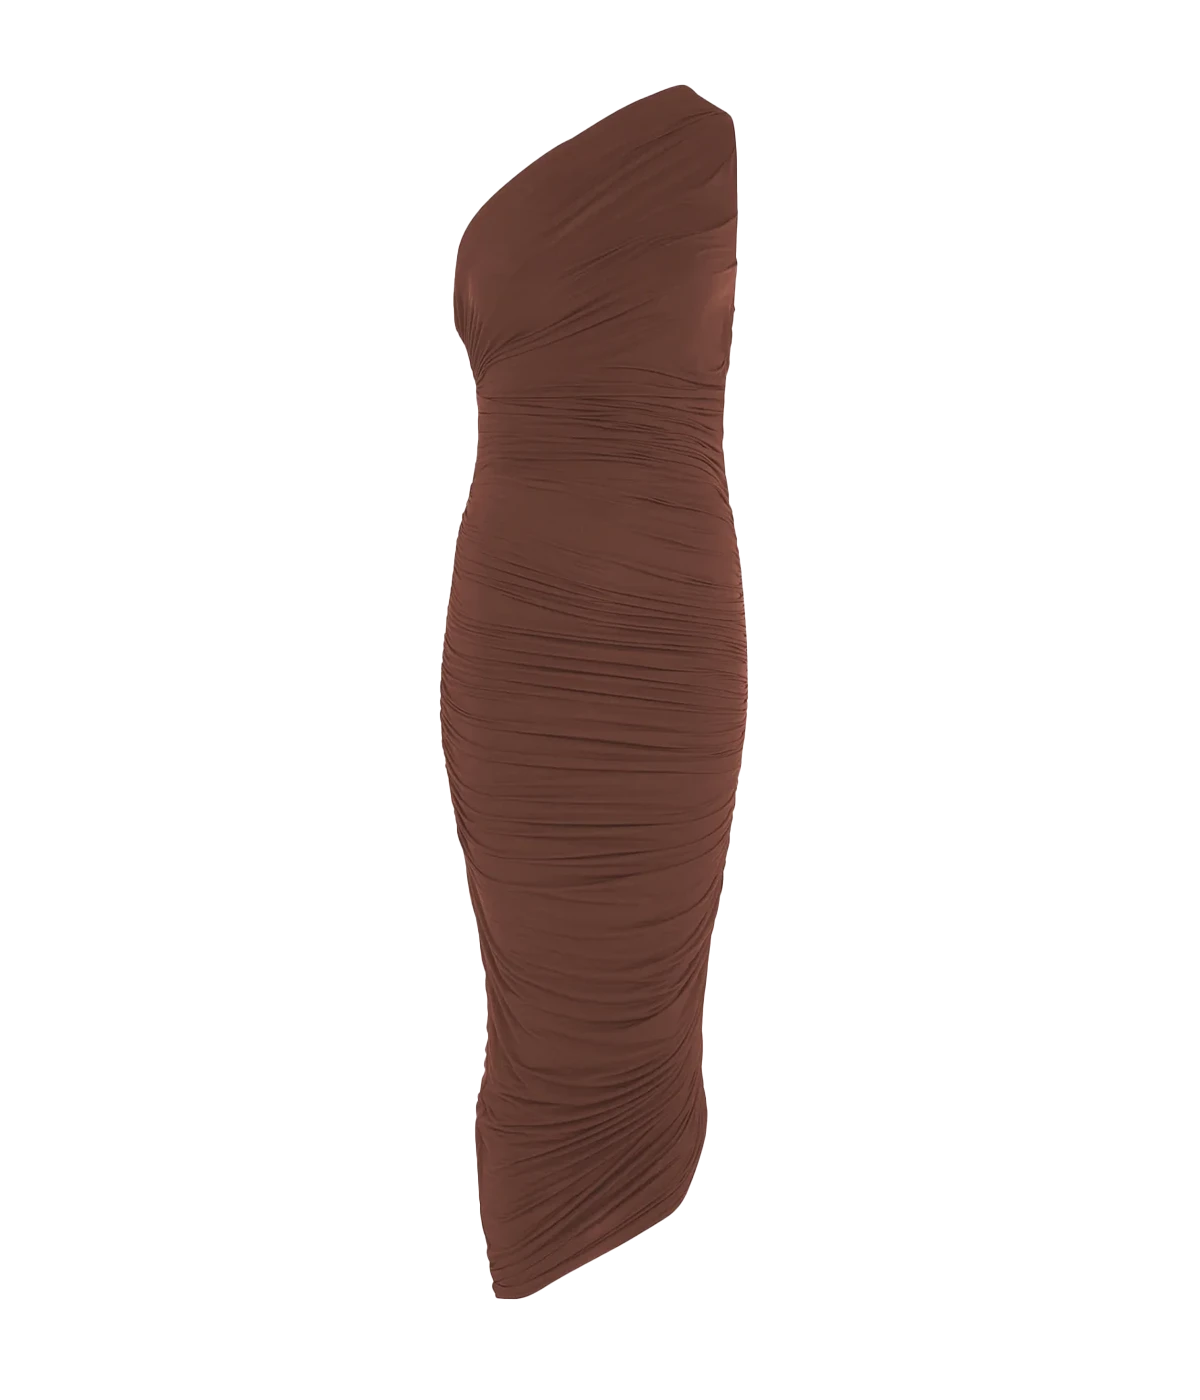 A sexy elegant silky evening dress, in a chocolate colourway, featuring a one shoulder, dipped hem and side draped ruching. Date night dress, midi length, sleeveless, made in Amsterdam, party dress, birthday dress. 